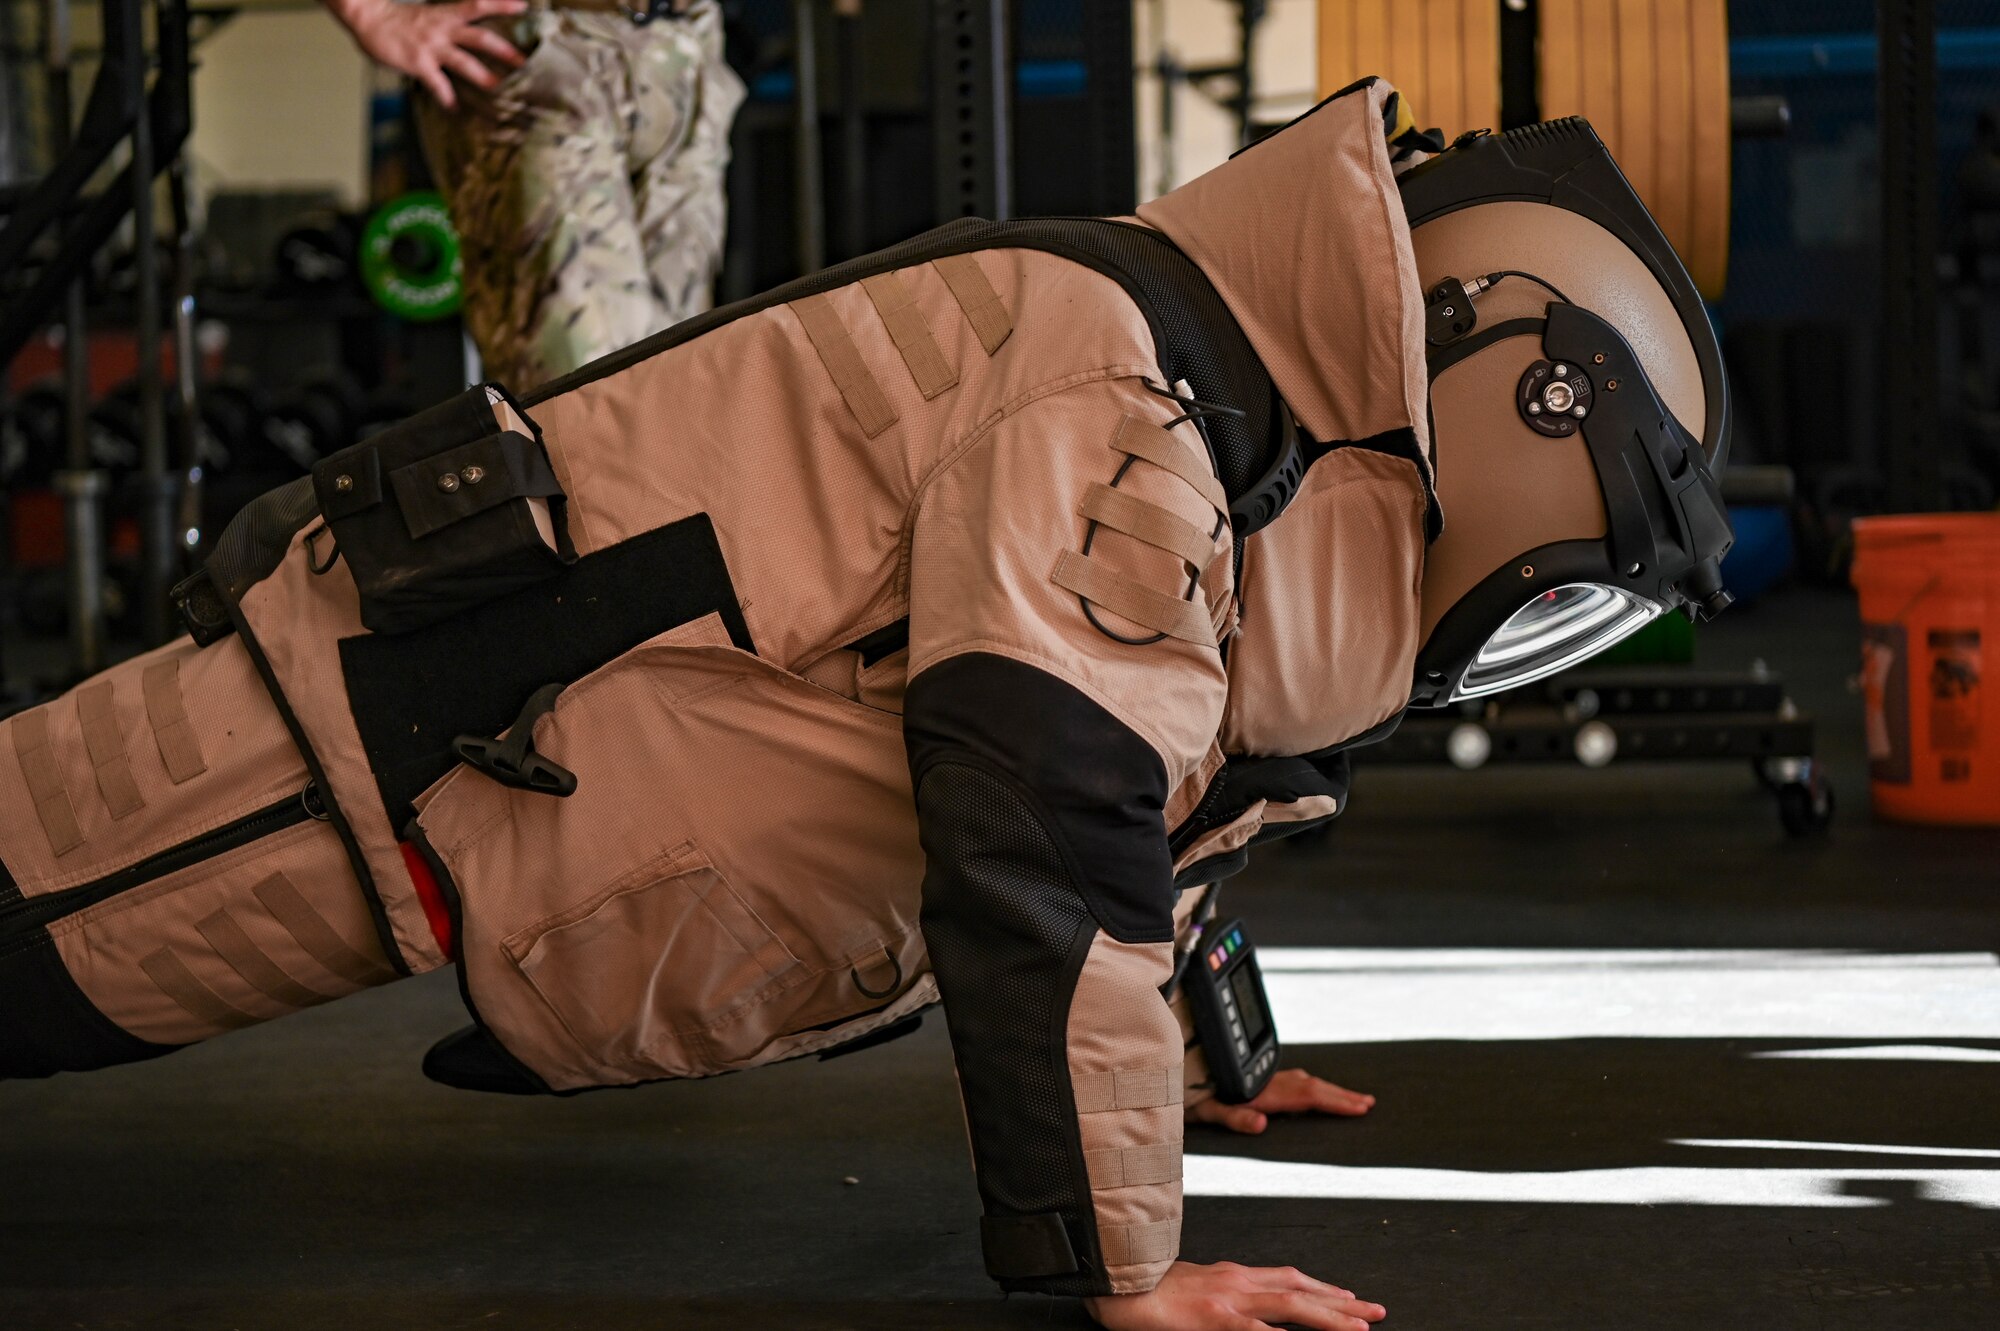 Wesley Teza, University of Florida Air Force ROTC cadet, does pushups in Explosive Ordnance Disposal individual protective equipment during an Air Force cadet tour at Dyess Air Force Base, Texas, July 18, 2023. The cadets toured 14 units around the base like security forces, logistics, medical, flightline operations and civil engineering. The tour gave the cadets the opportunity to get hands-on experience of life in the operational Air Force while seeing how Dyess impacts the overall Air Force mission. (U.S. Air Force photo by Airman 1st Emma Anderson)